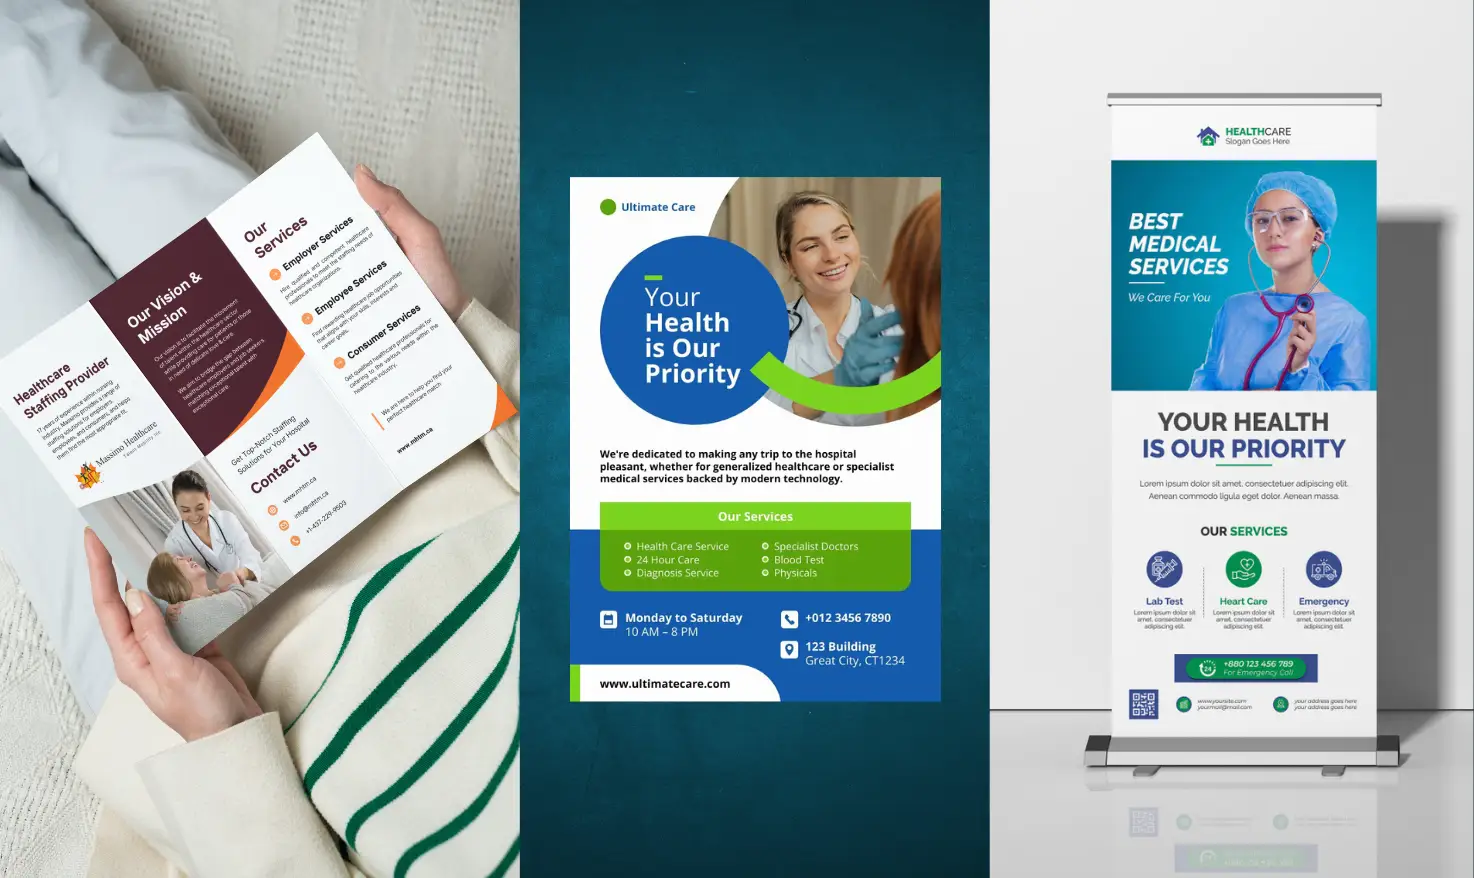 Marketing Material Design For Healthcare Industry